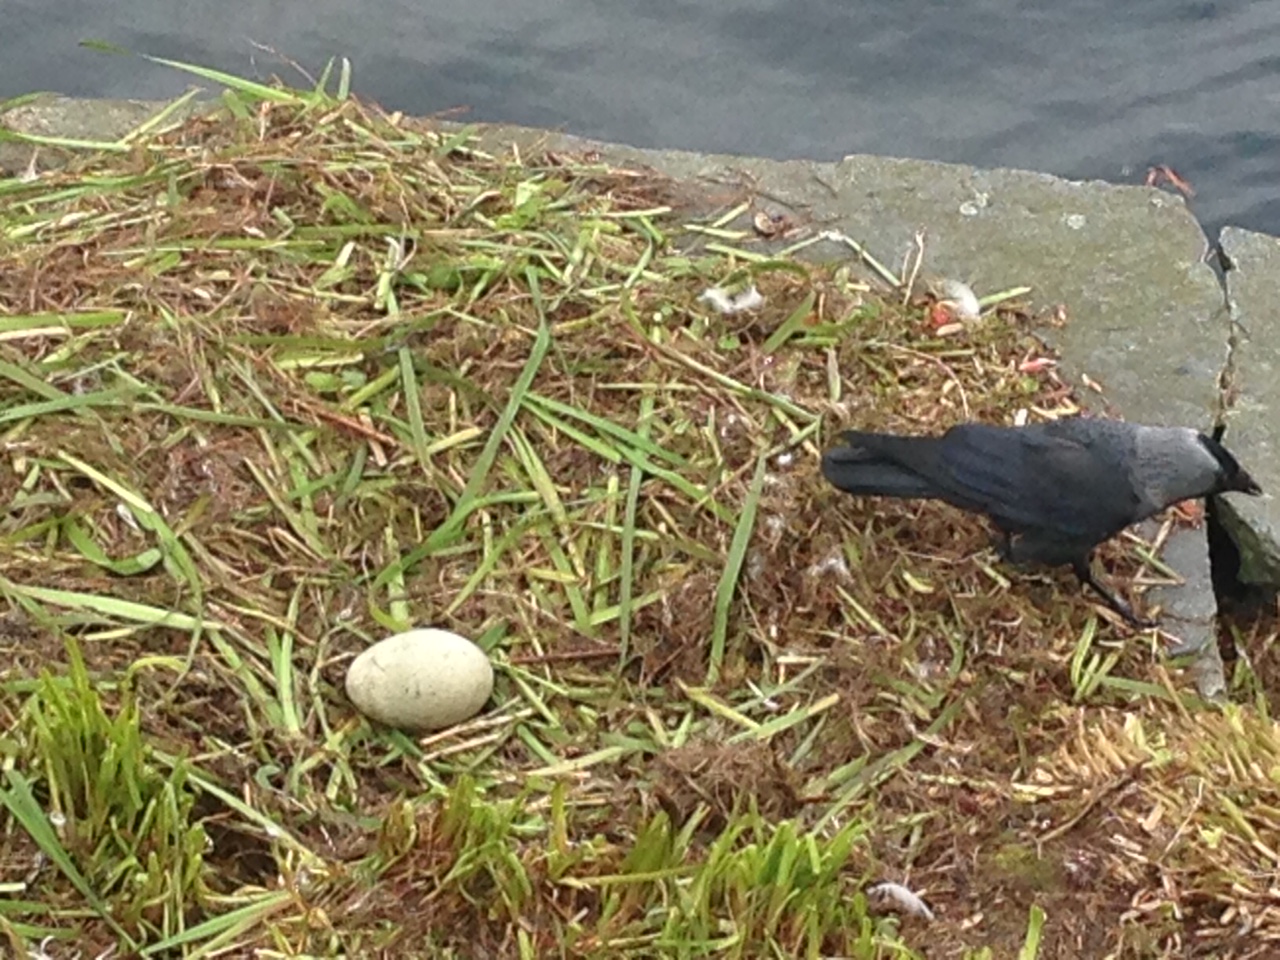 Swan egg by the lake